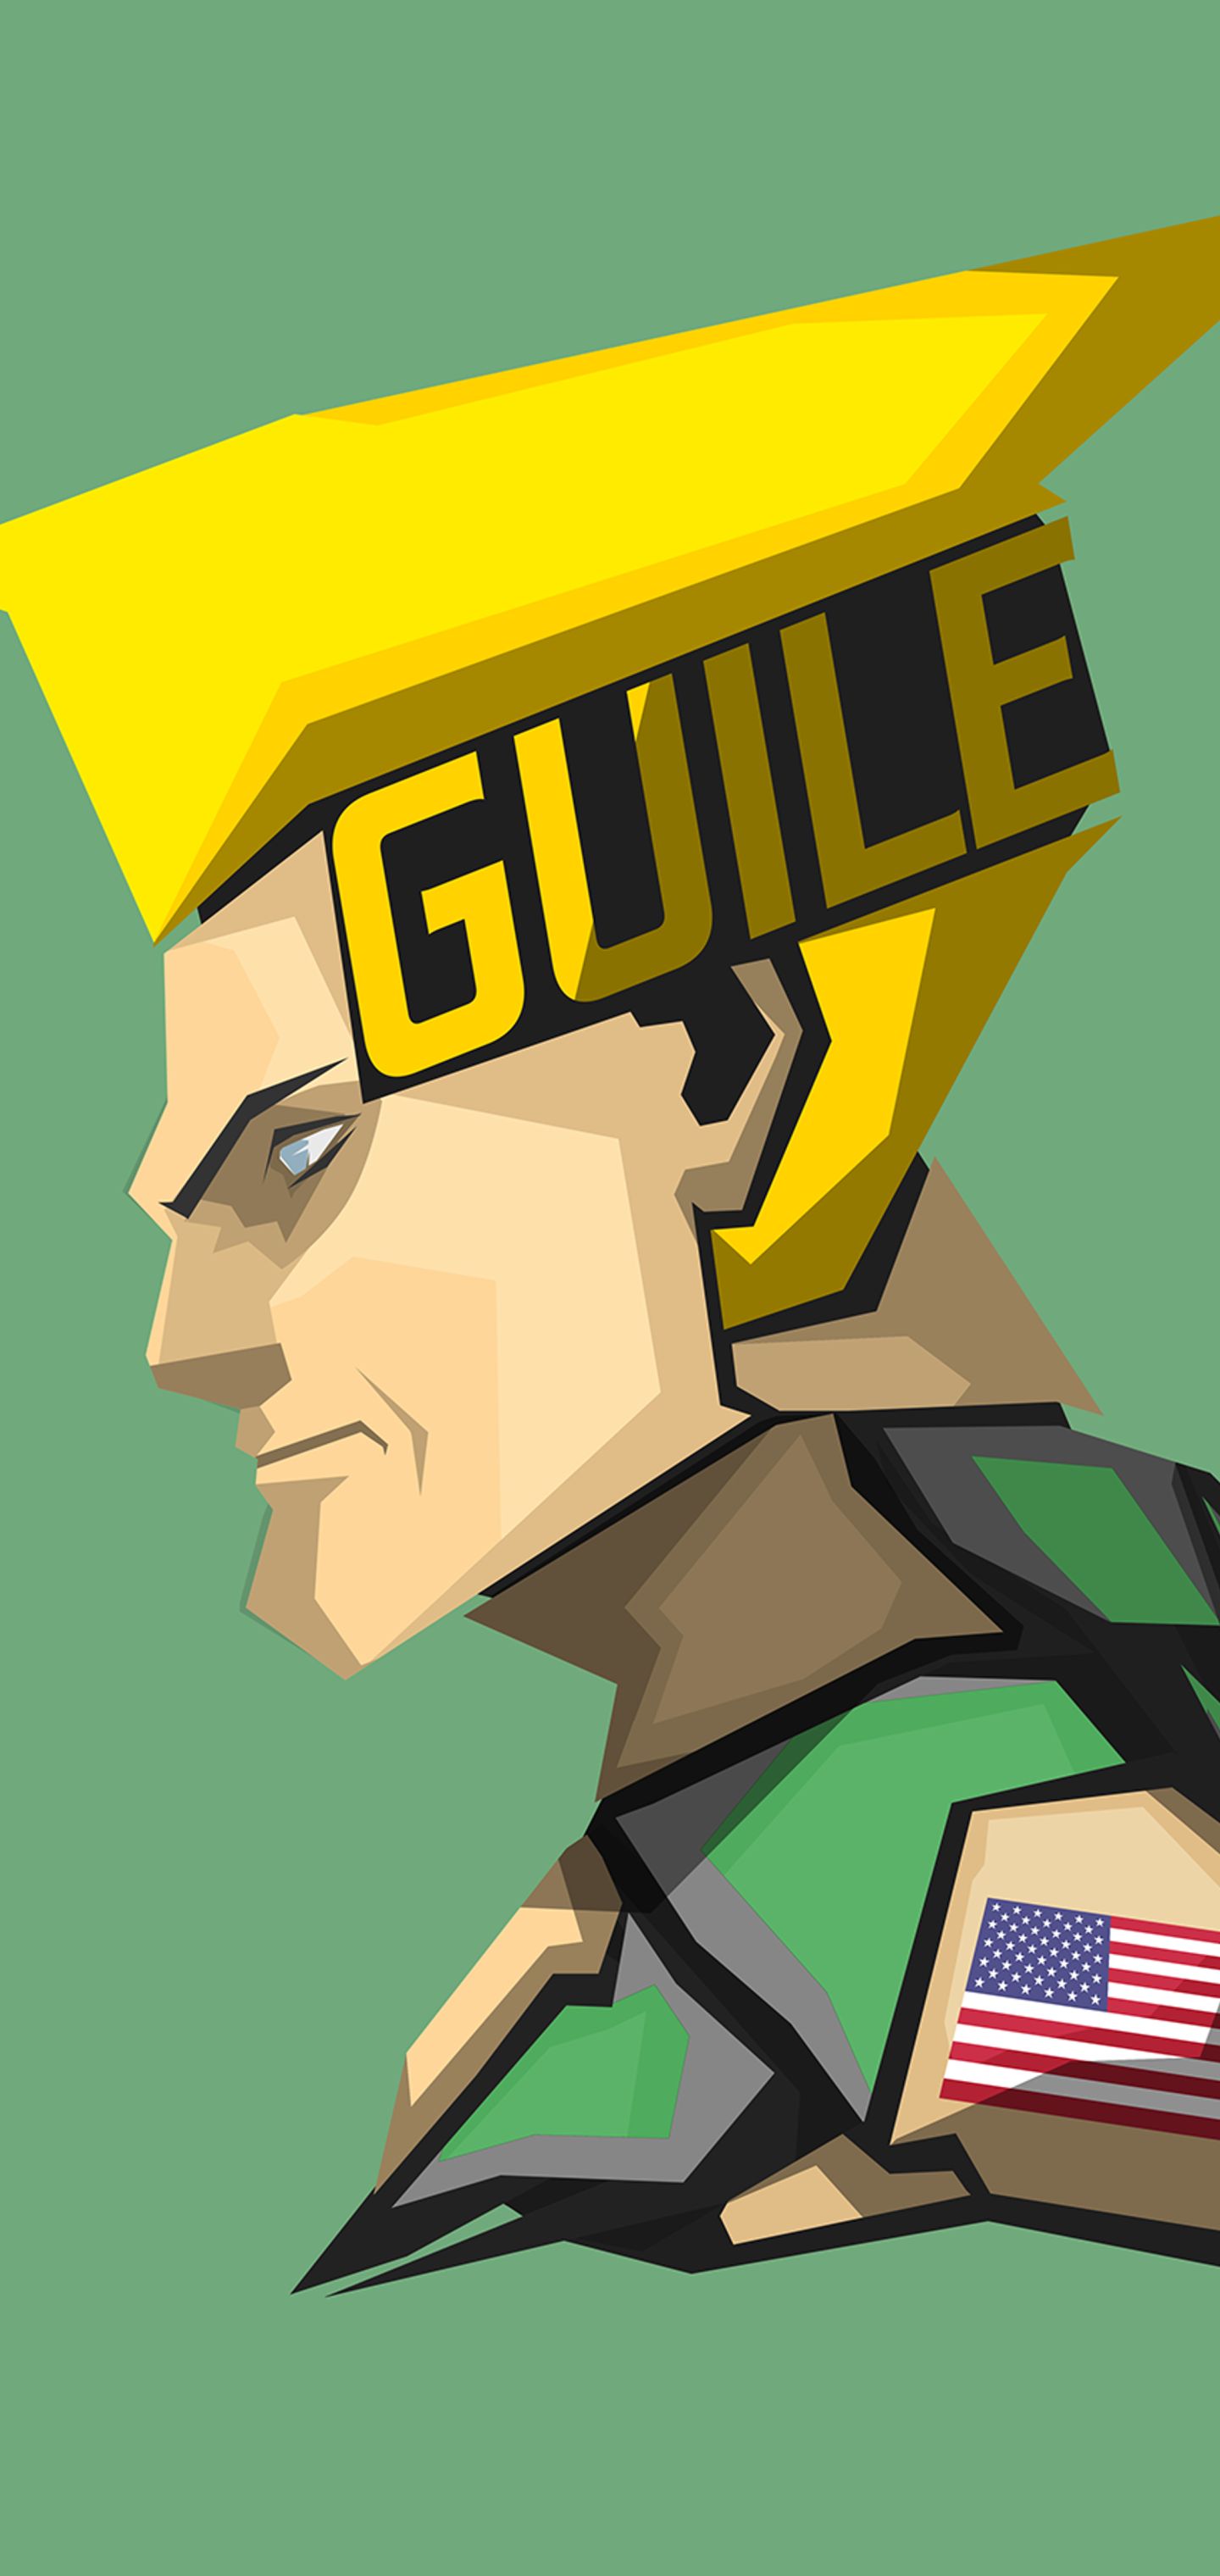 Photo Street Fighter Guile Games 1920x1280